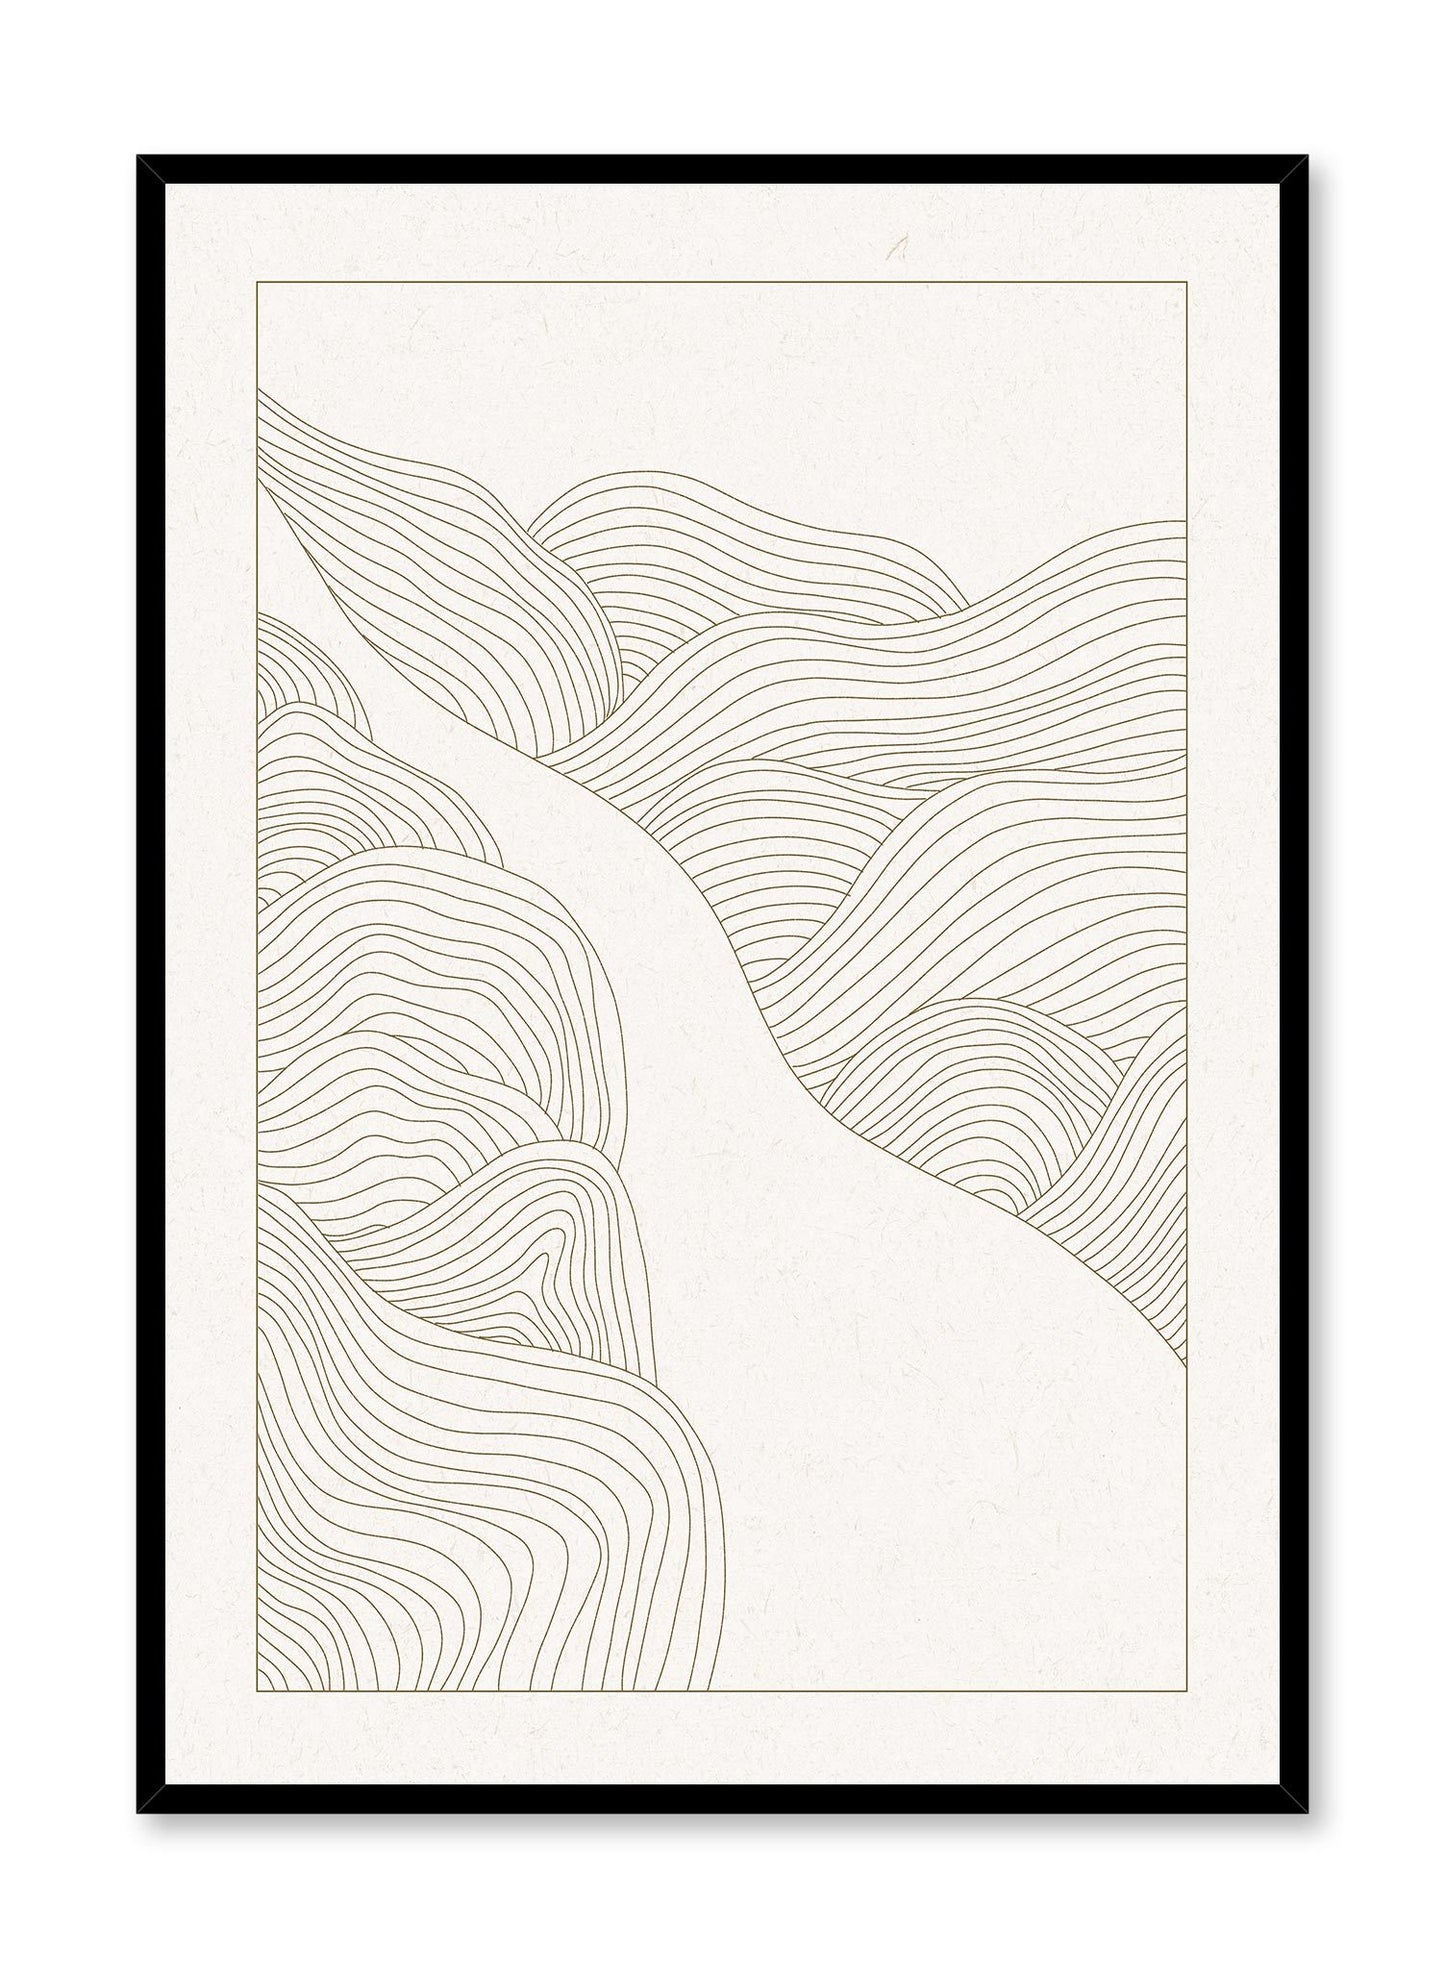 Wave Path is a minimalist illustration by Opposite Wall of a combination of curved lines resembling a path and the surrounding circular waves.